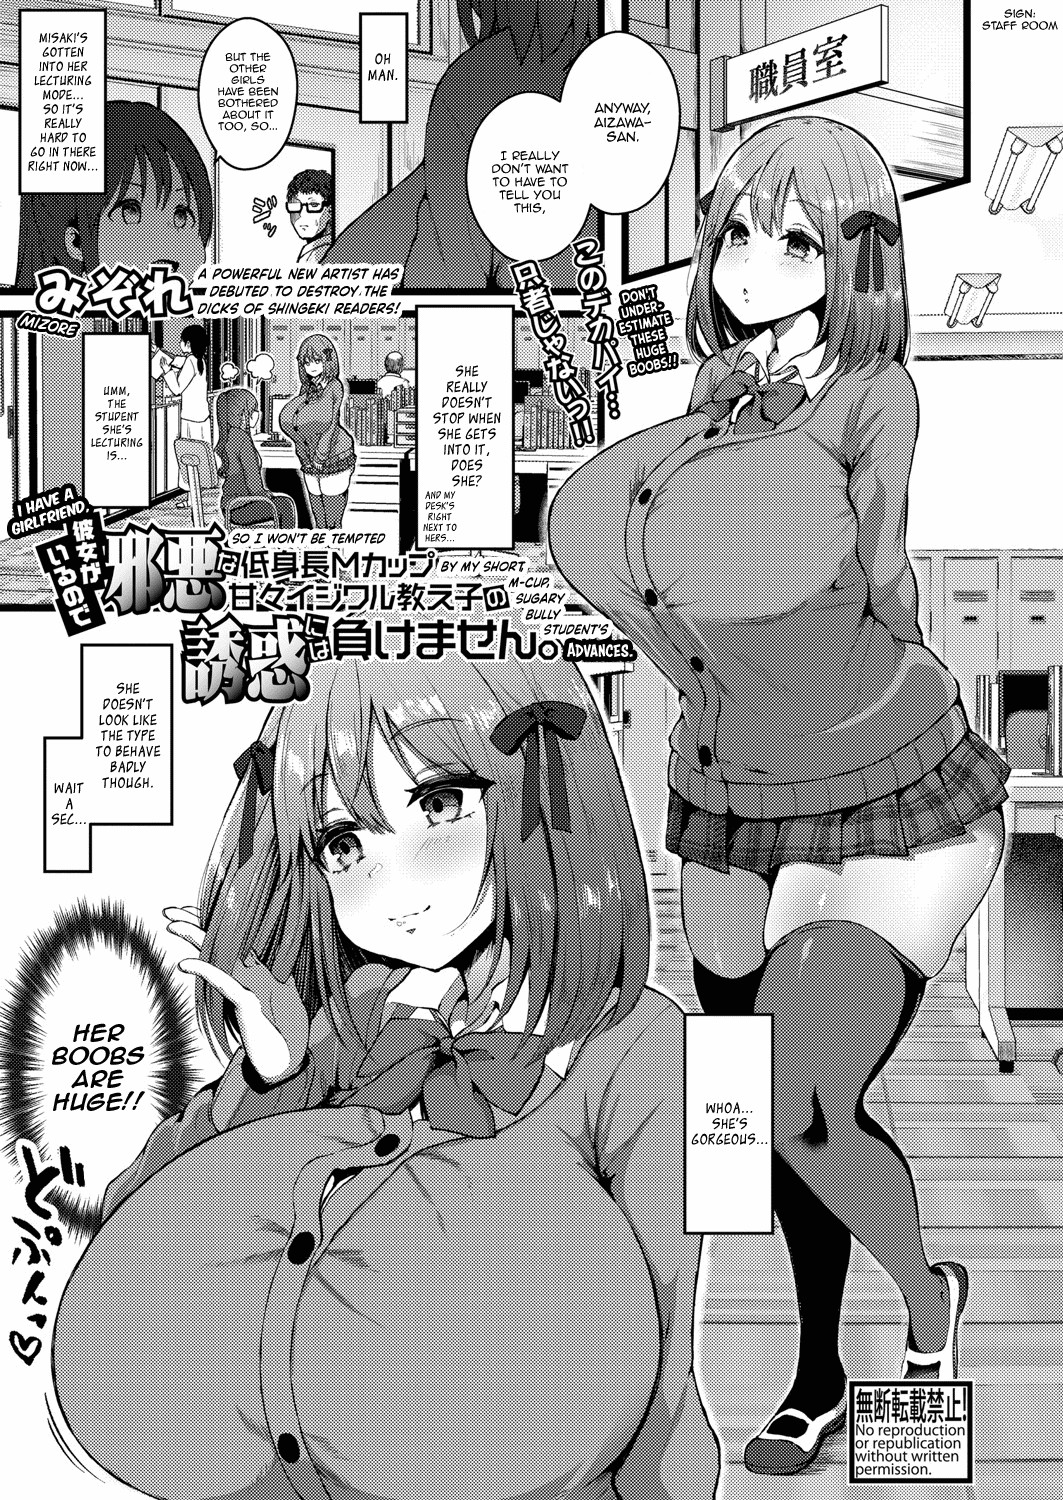 Hentai Manga Comic-I Have A Girlfriend, So I Won't Be Tempted by My Short, M-cup, Sugary Bully Student's Advances-Read-1